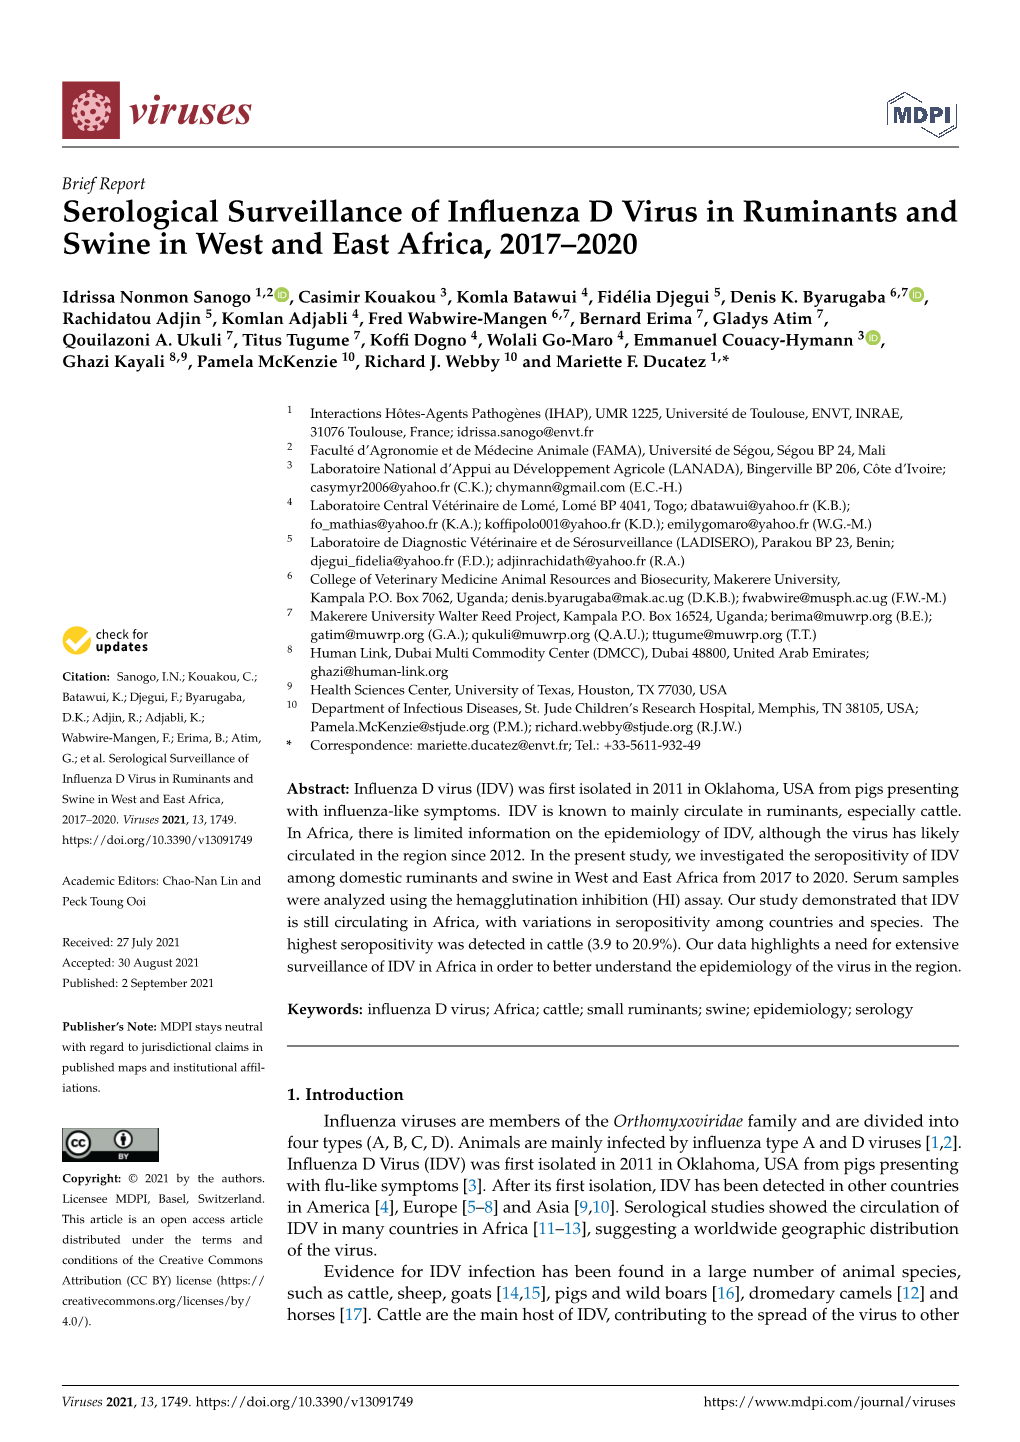 Serological Surveillance of Influenza D Virus in Ruminants and Swine in West and East Africa, 2017–2020